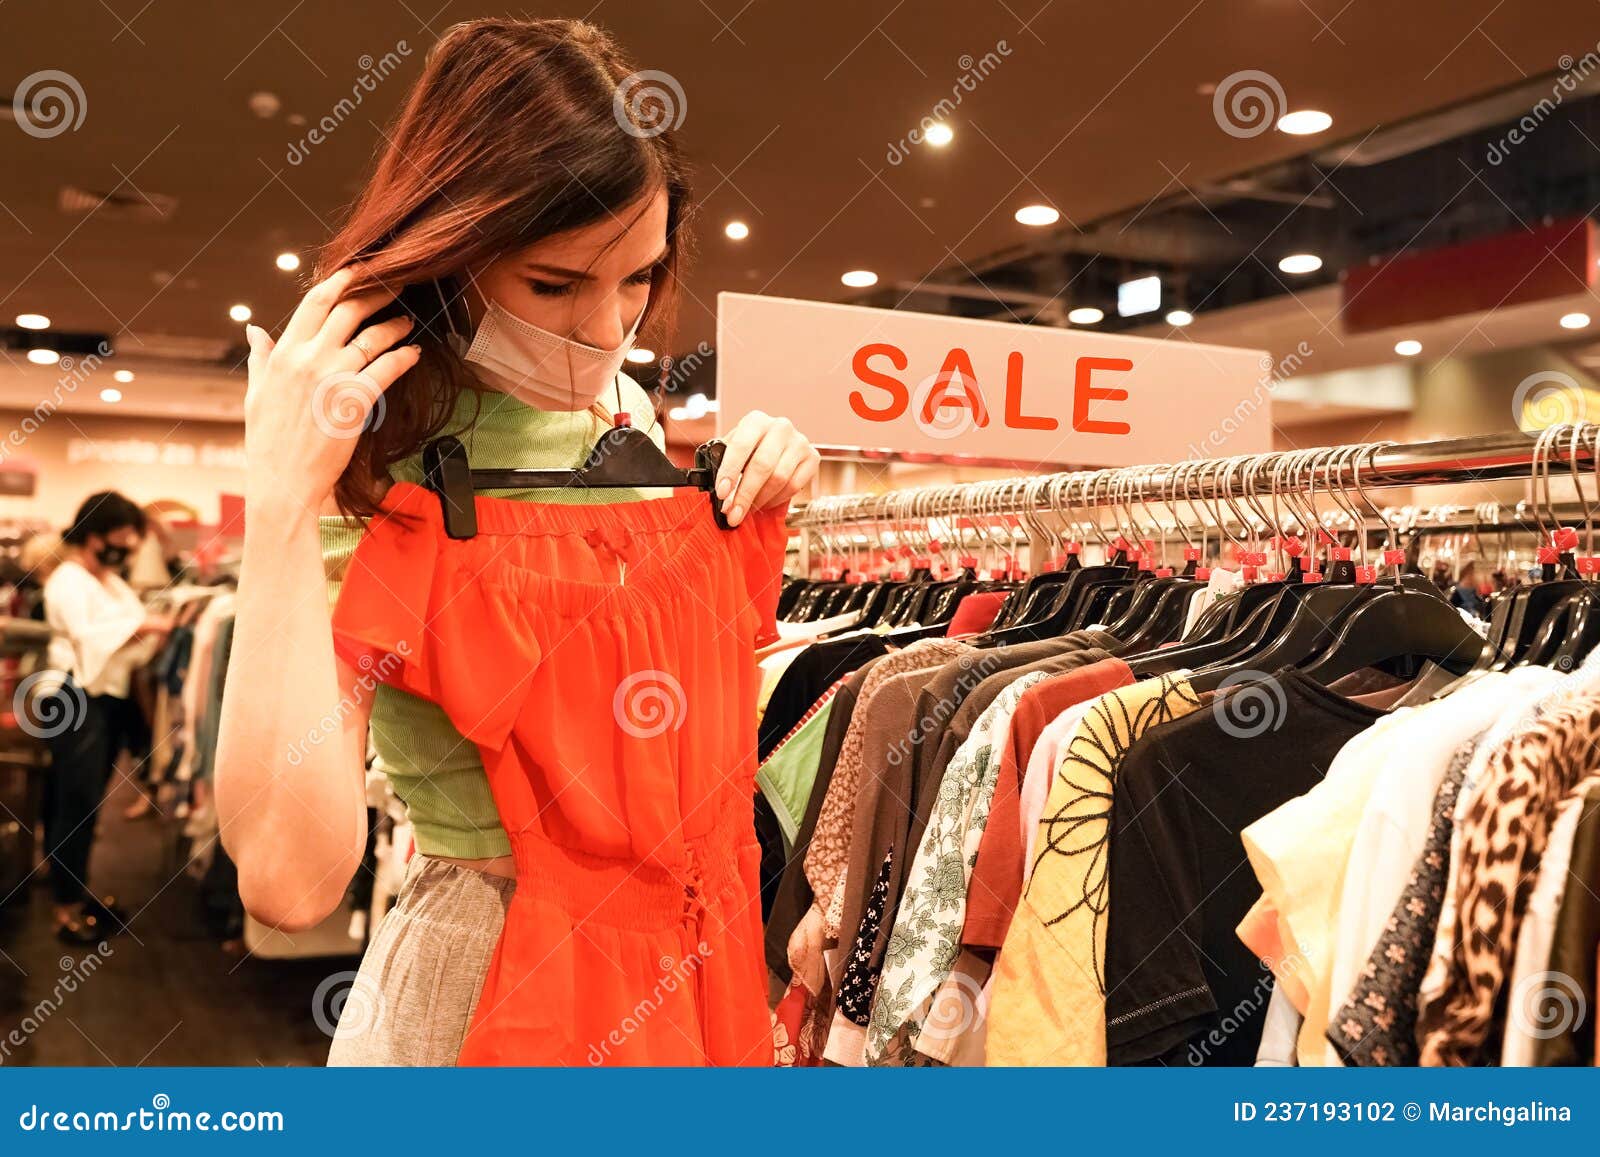 Discounted Fashion Apparel, Women's Clearance Clothing